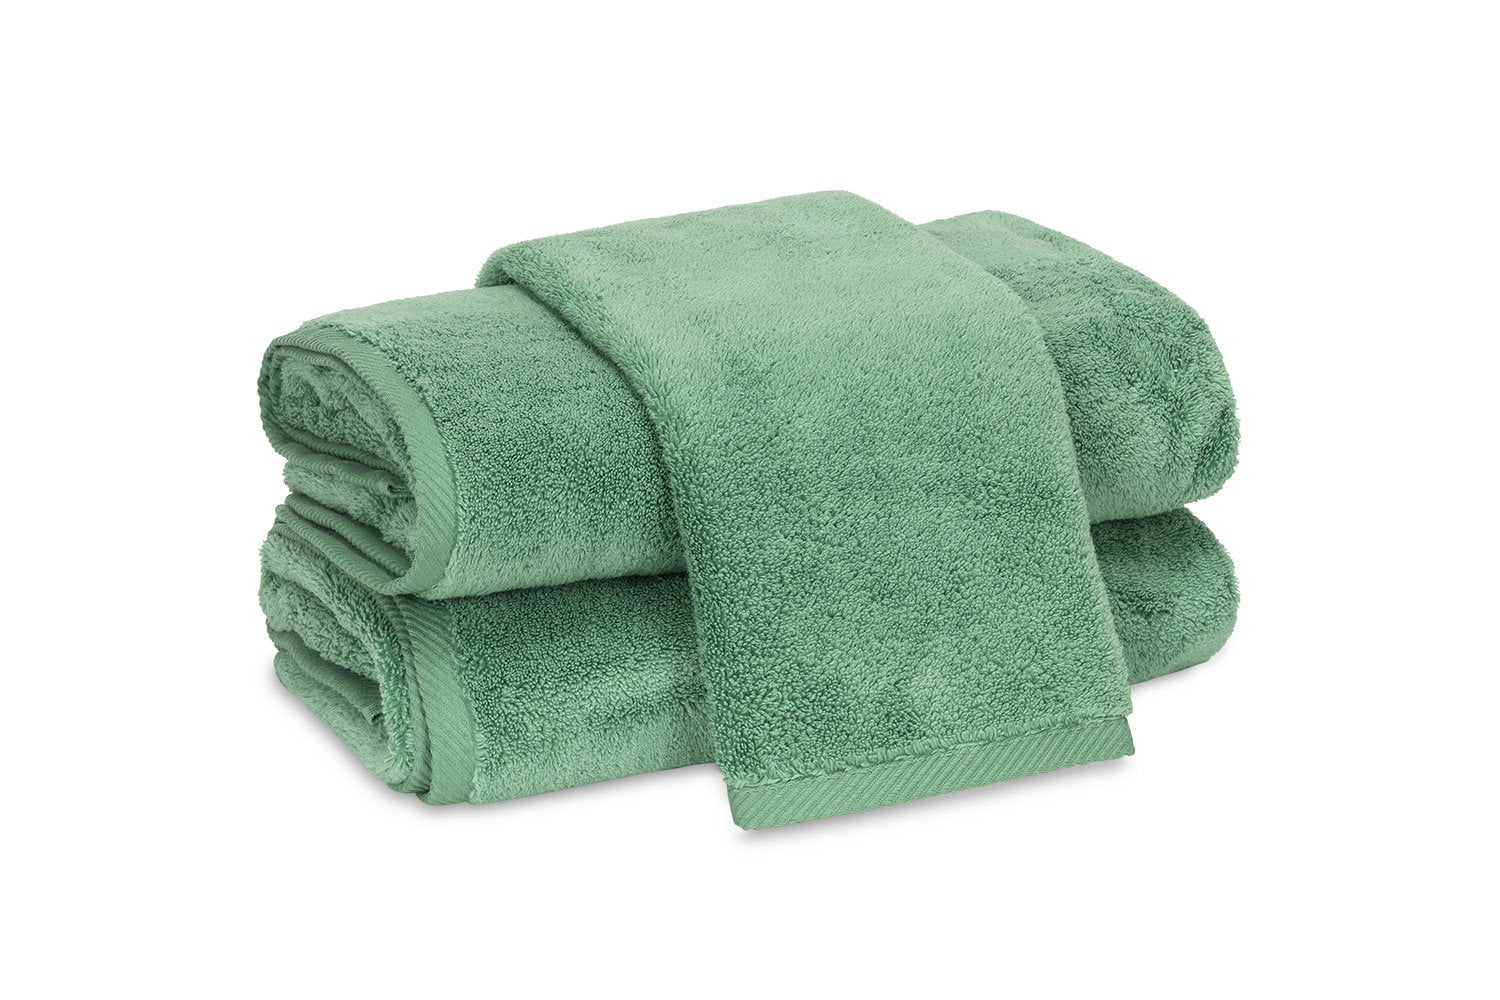 Milagro Grass Green Towels by Matouk